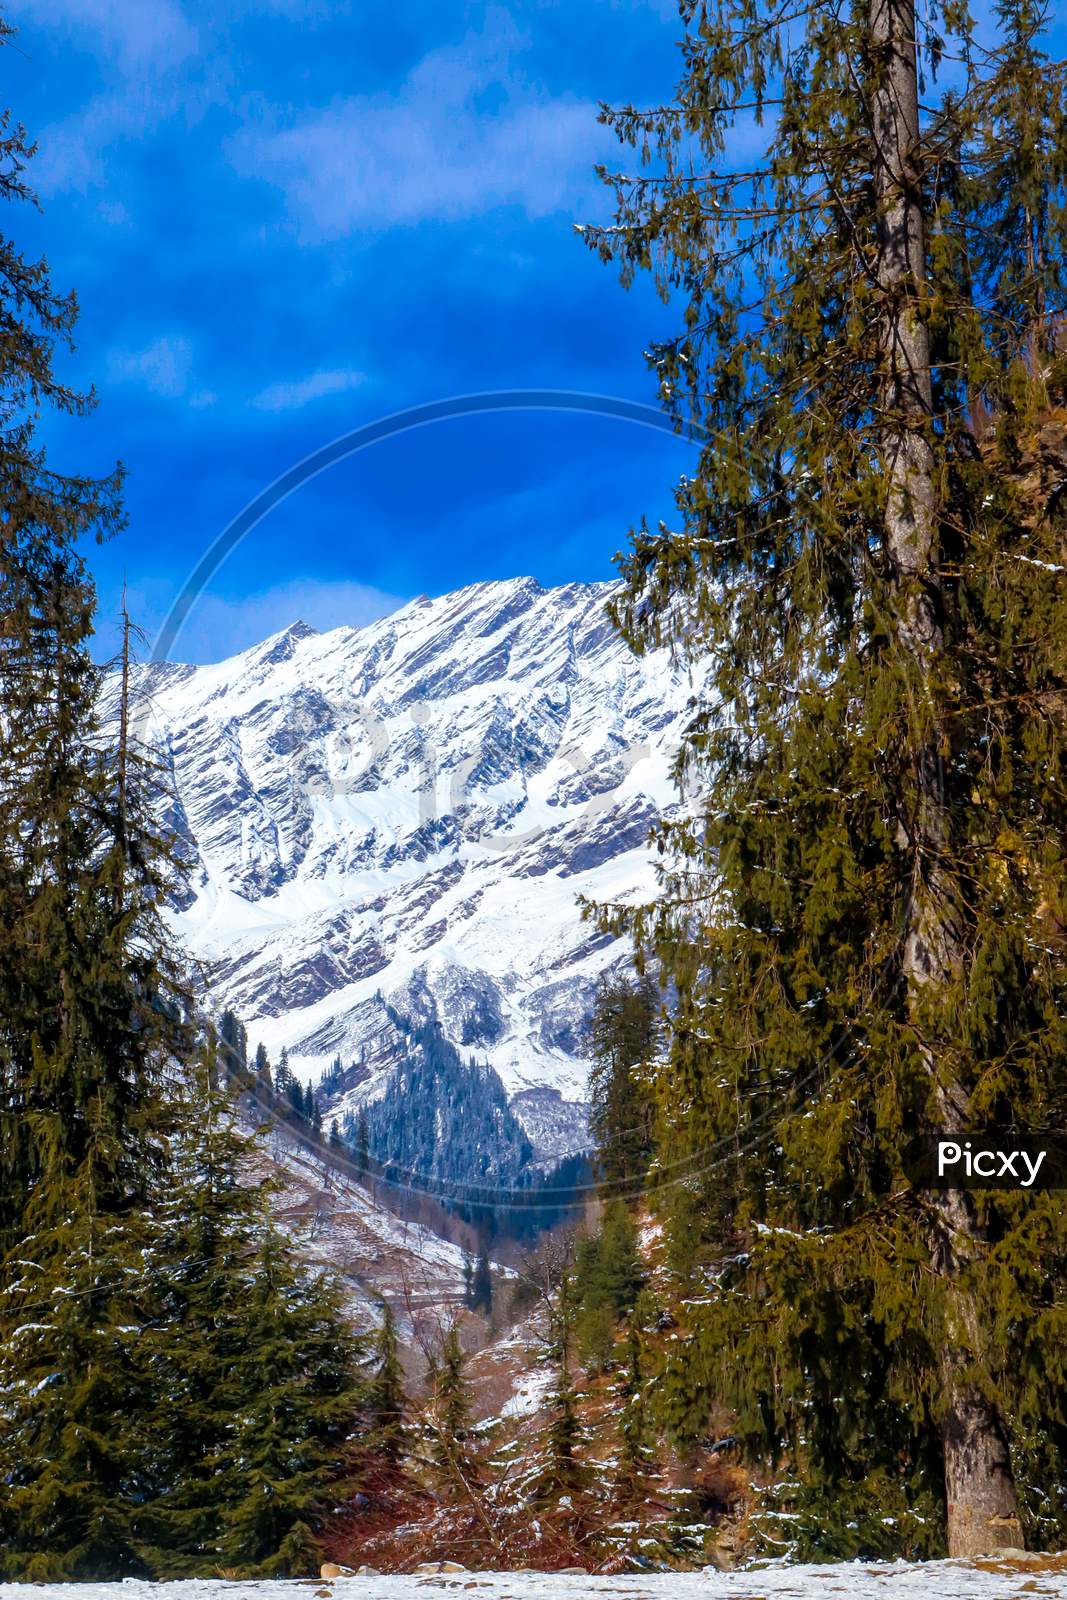 Pine Tree On Both Sides Of The Frame And Snow-Covered Mountain In The Middle.